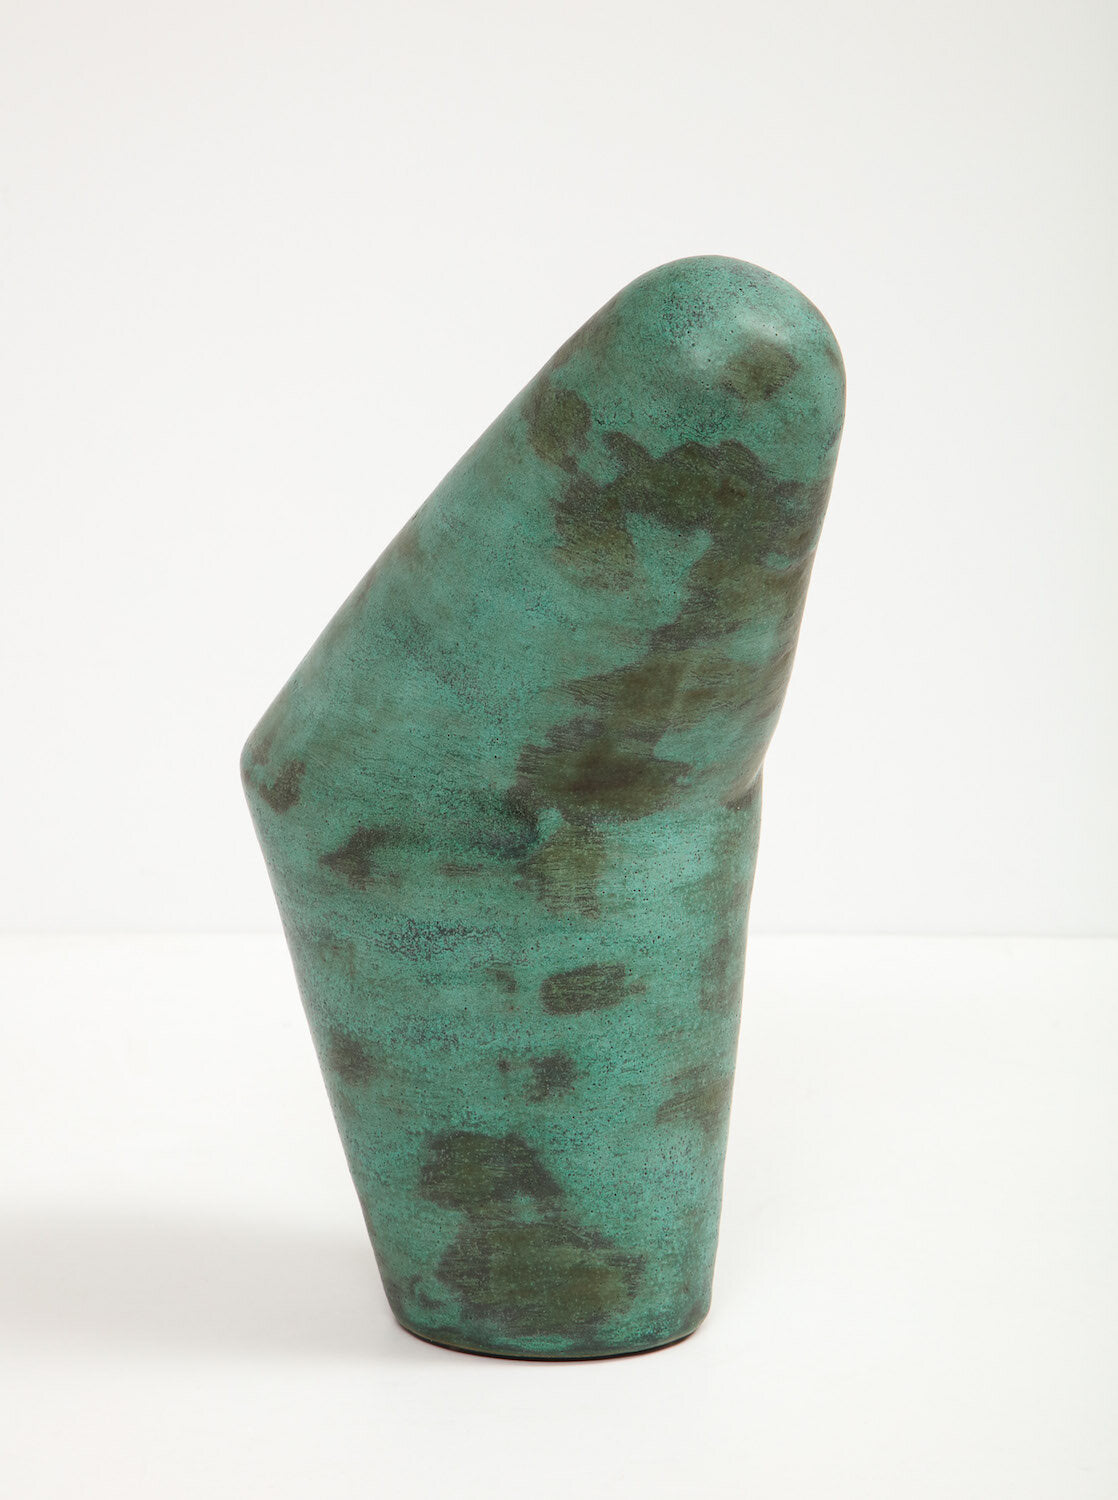 Untitled "Elbow" Sculpture by David Haskell